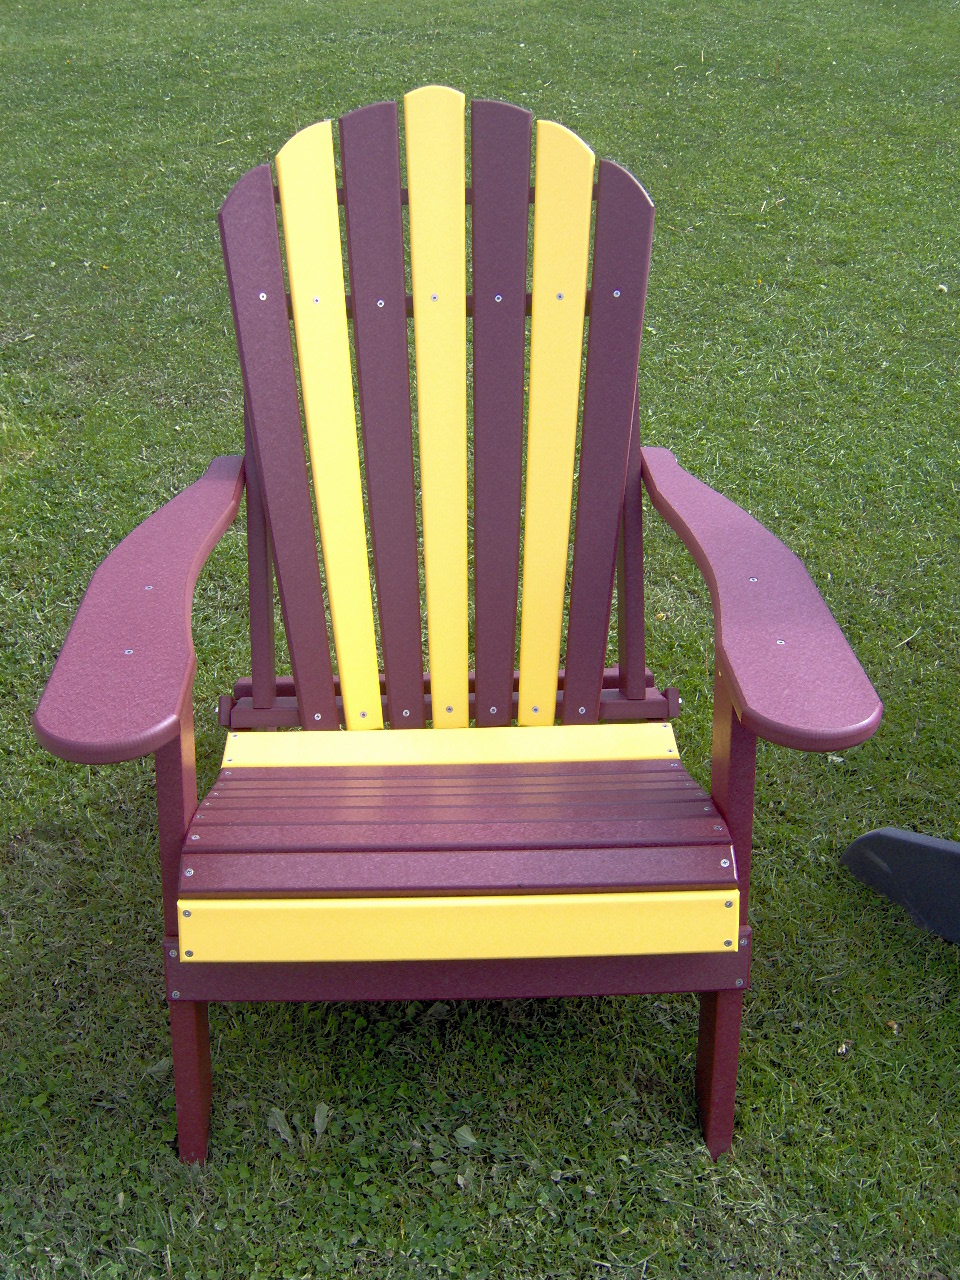 Cleveland Cavaliers Poly Lumber Adirondack Chair Ma Pa S